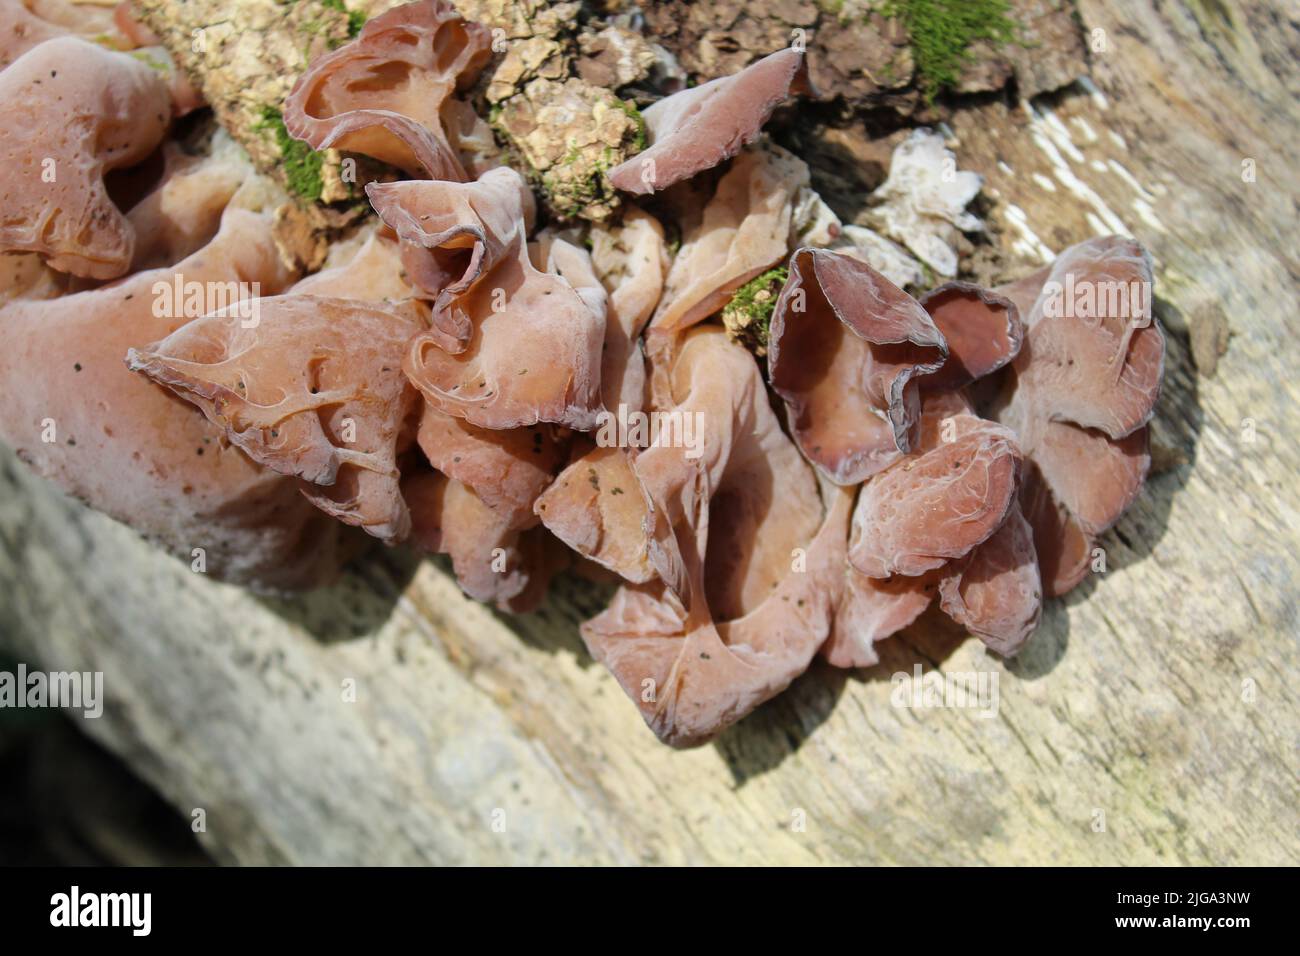 Wood ear mushrooms on a log at Camp Ground Road Woods in Des Plaines, Illinois Stock Photo